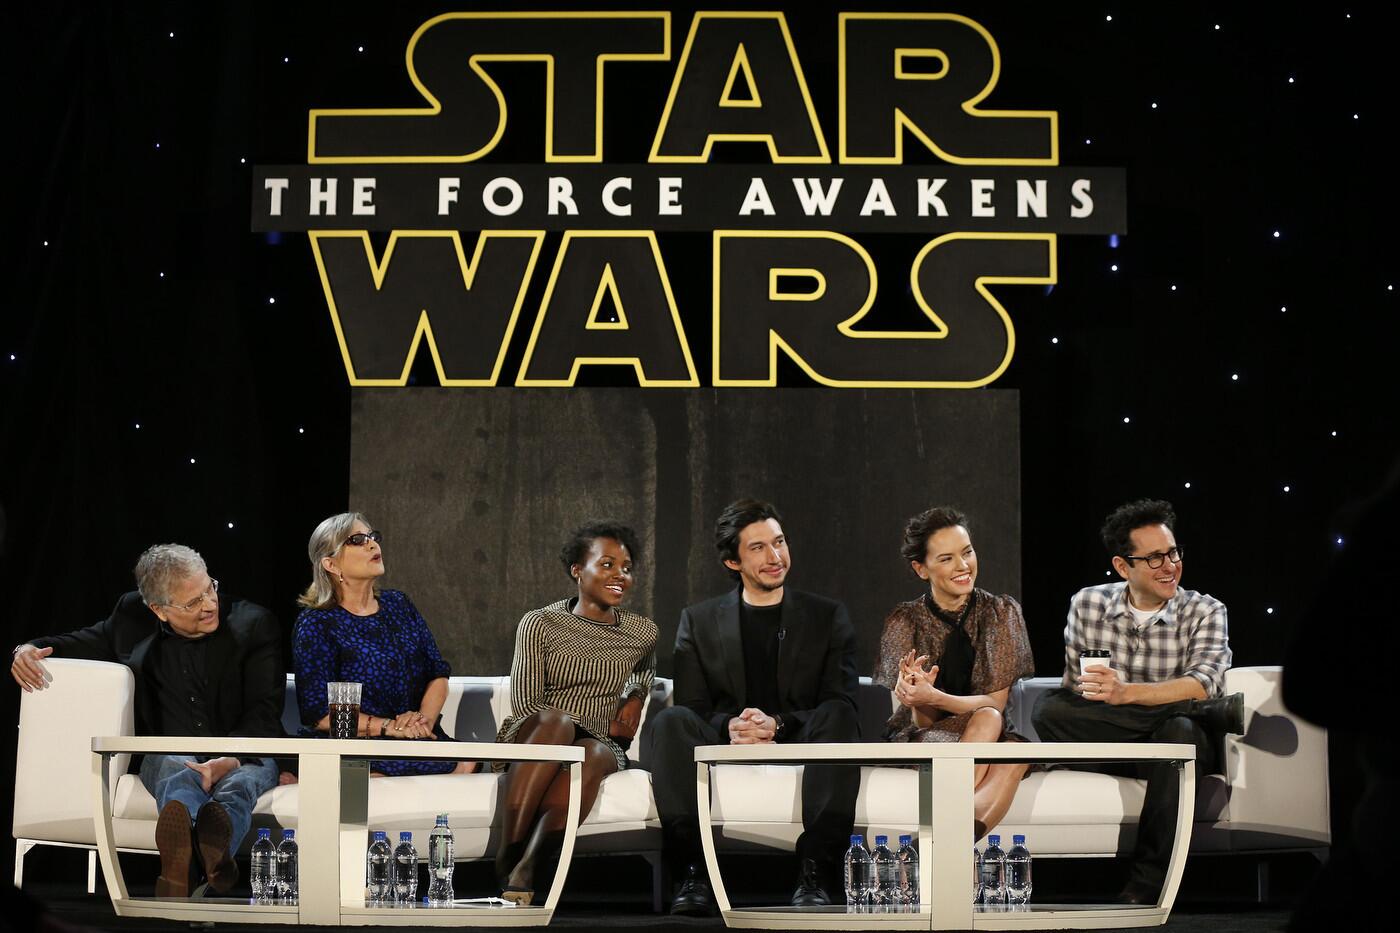 A press junket in L.A. for "Star Wars: The Force Awakens" features writer Lawrence Kasdan, from left, Carrie Fisher, Lupita Nyong'o, Adam Driver, Daisy Ridley and J.J. Abrams.